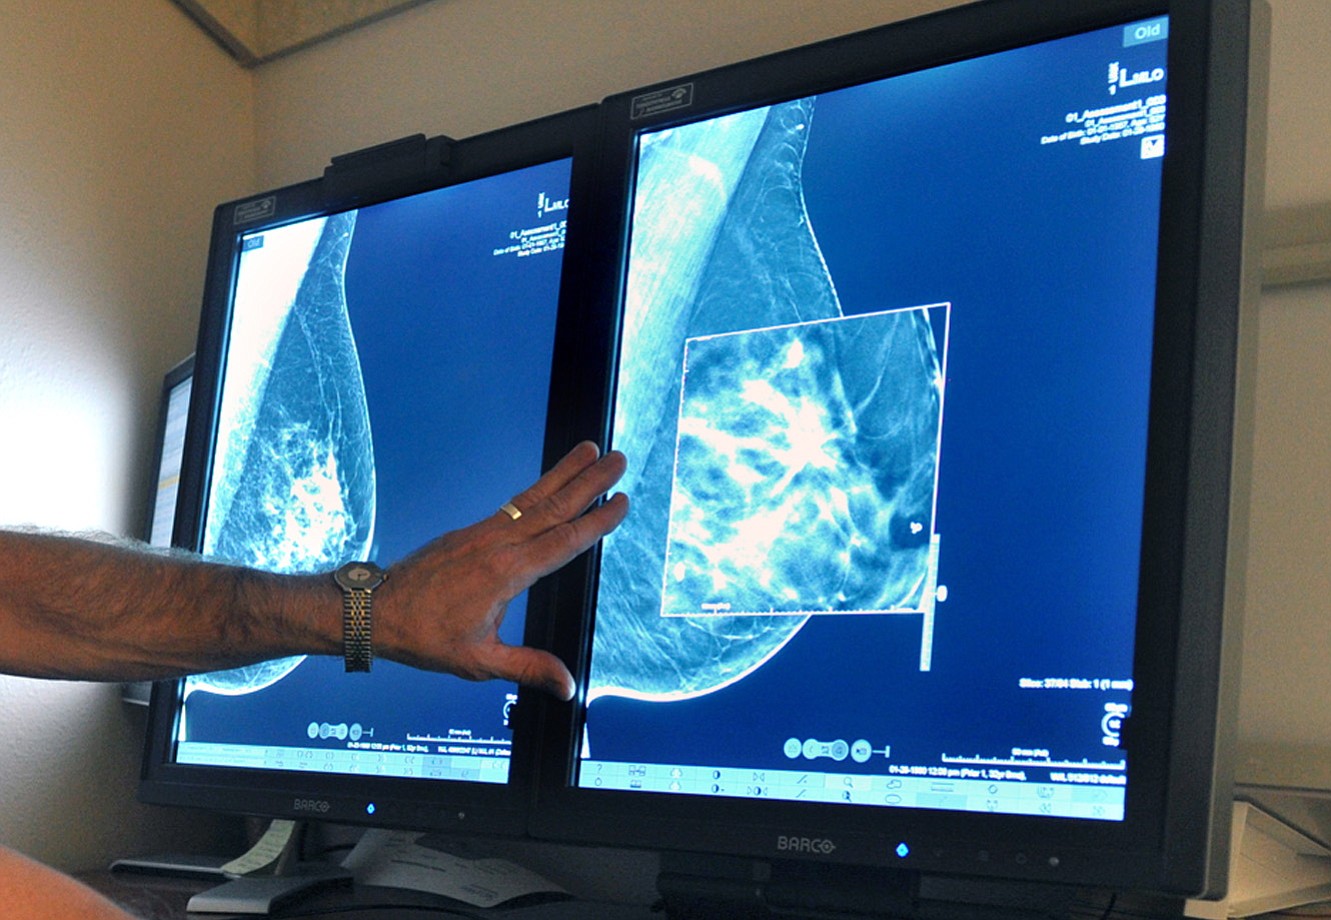 A radiologist compares an image from earlier, 2-D technology mammogram to the new 3-D Digital Breast Tomosynthesis mammography in Wichita Falls, Texas.